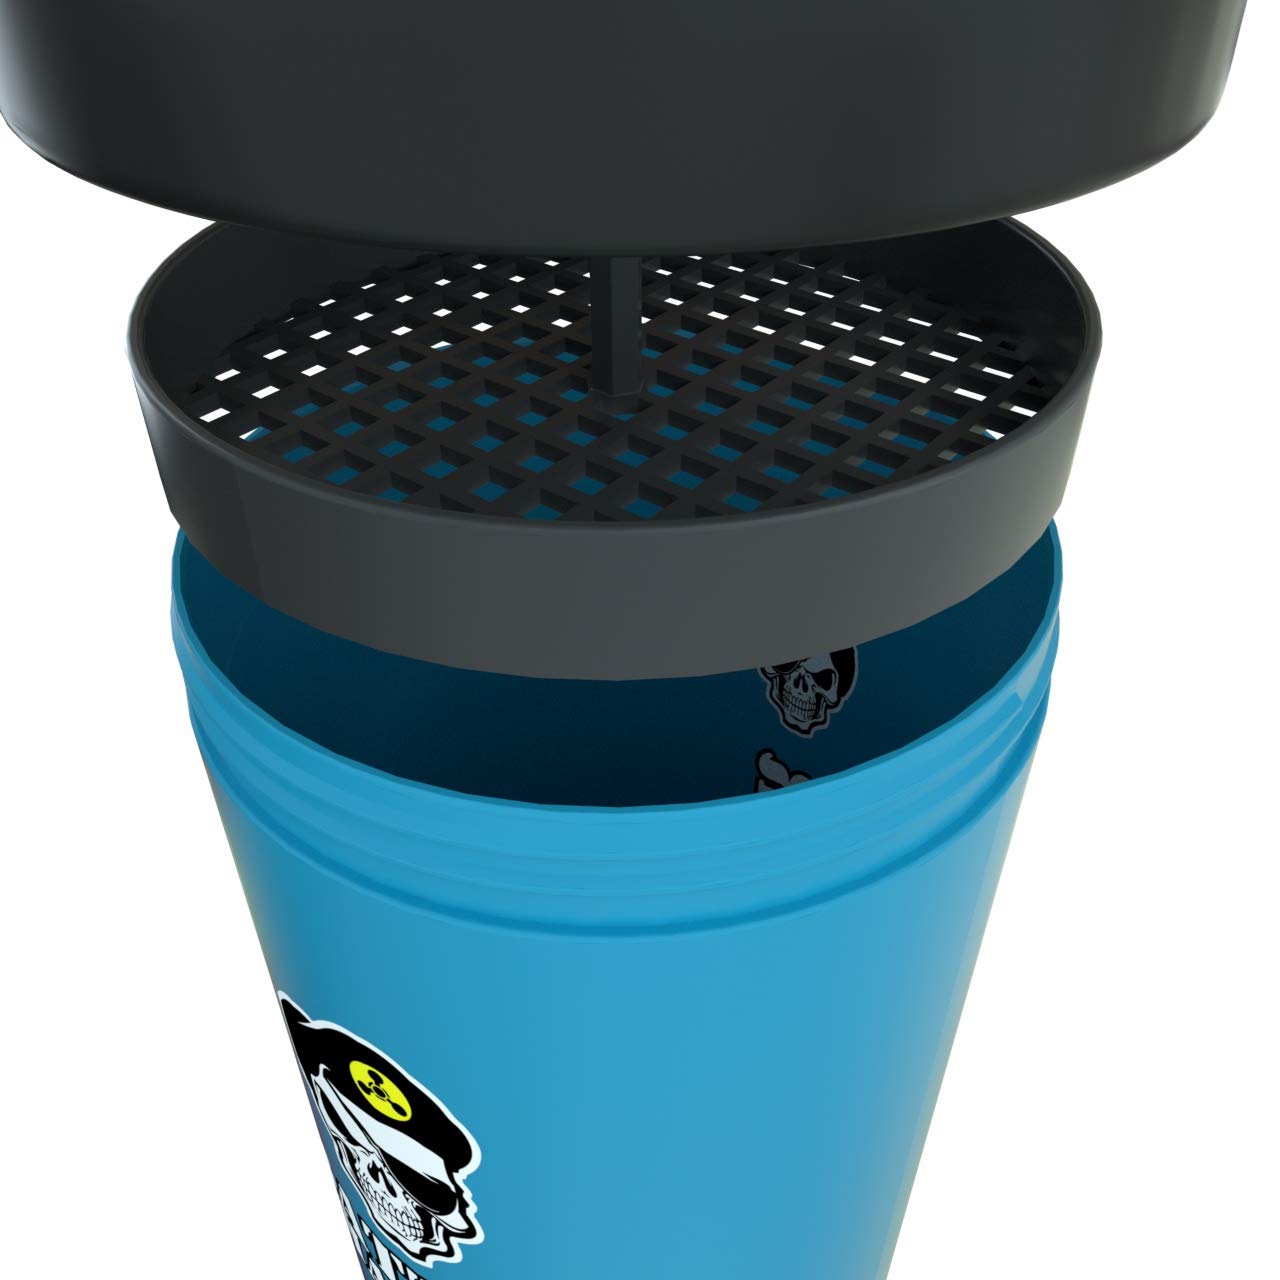 Battle Shakers Mortar Shaker Cup | Military Themed Shaker Bottle | Leak-Proof Protein Cup with Storage Compartment | Mix Protein Powders & More | Durable & Dishwasher Safe | 20 Oz Blue/Black